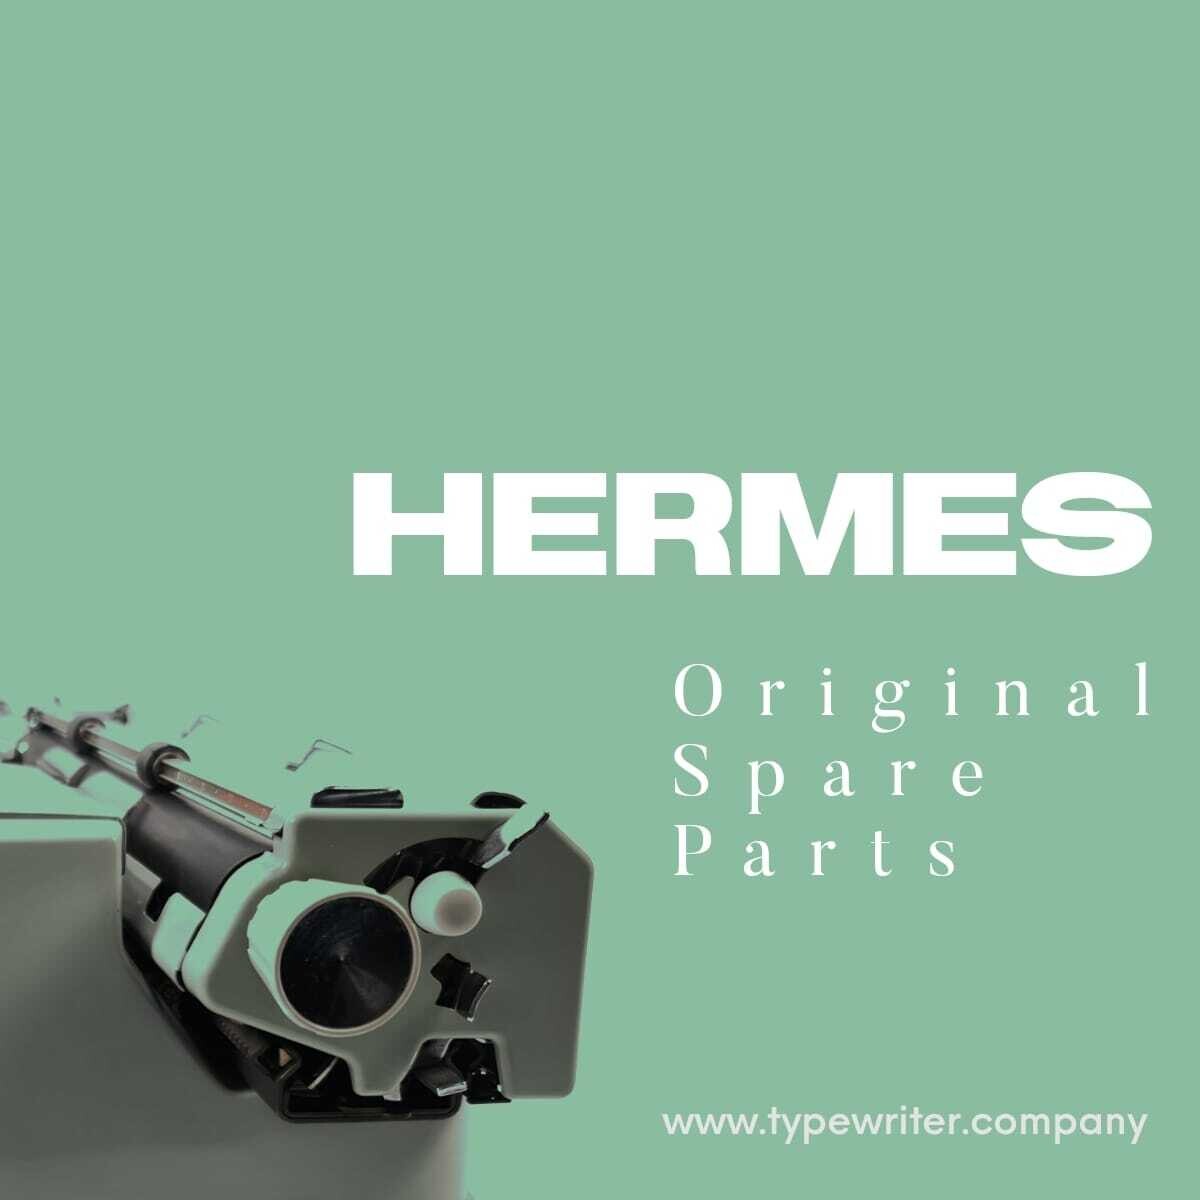 Hermes Spare Parts